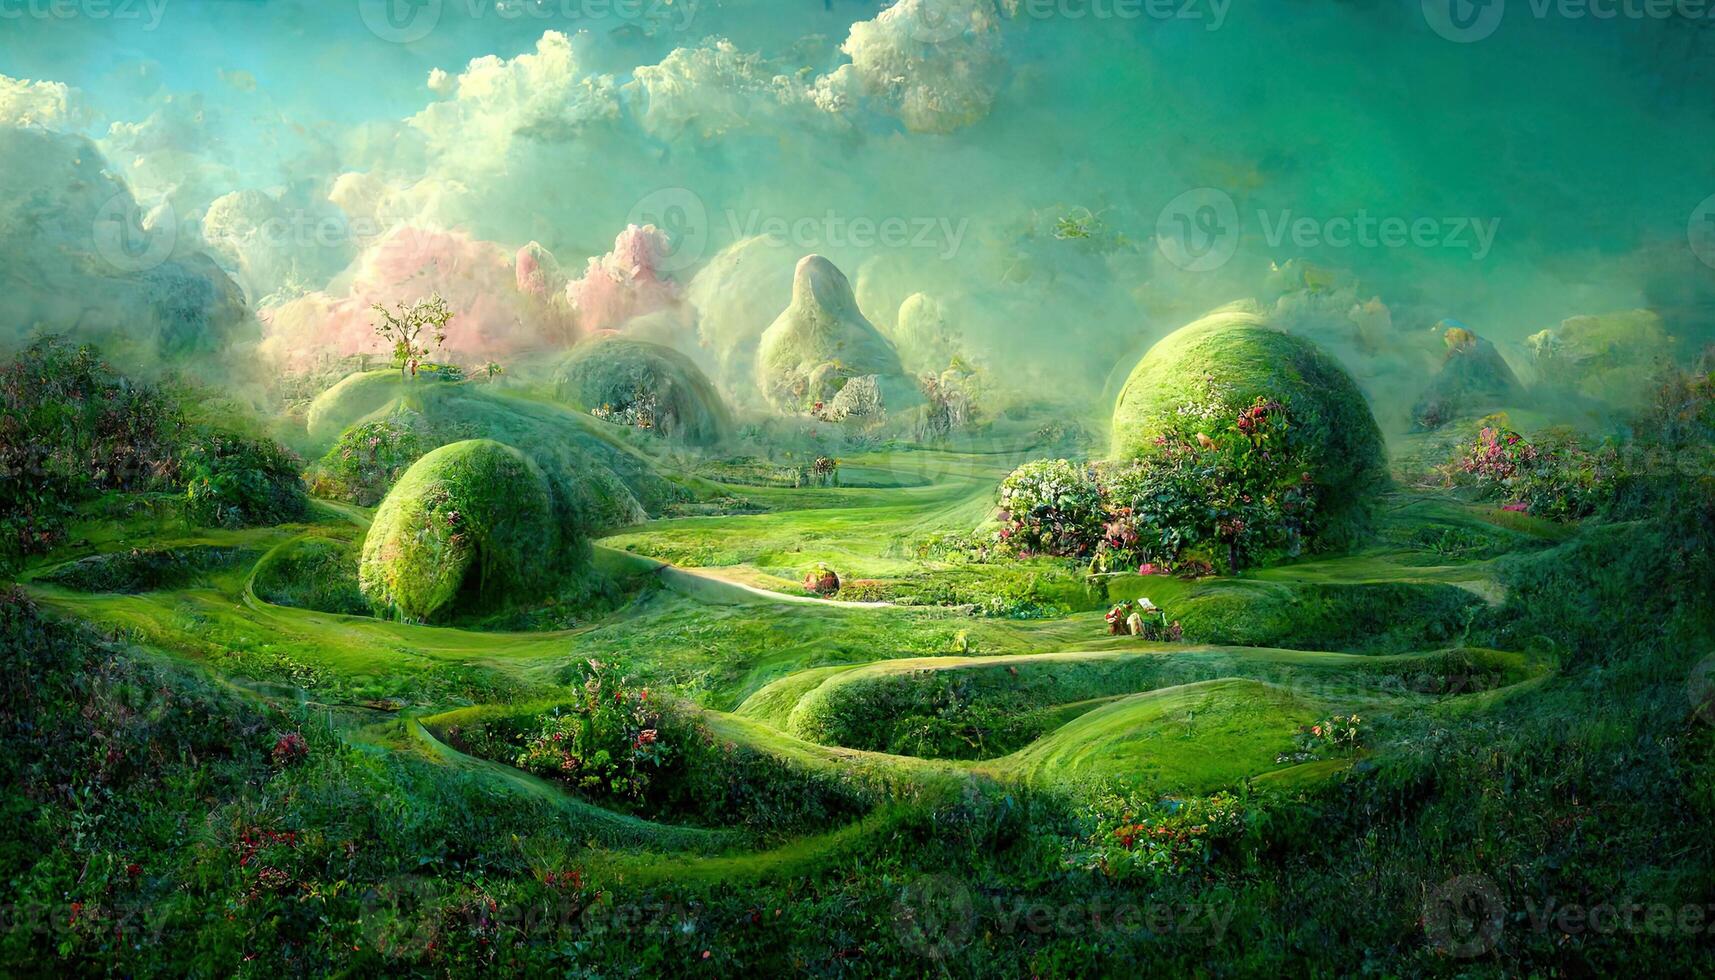 Childhood fantasy world dream green landscape a clear day environmental concept. photo